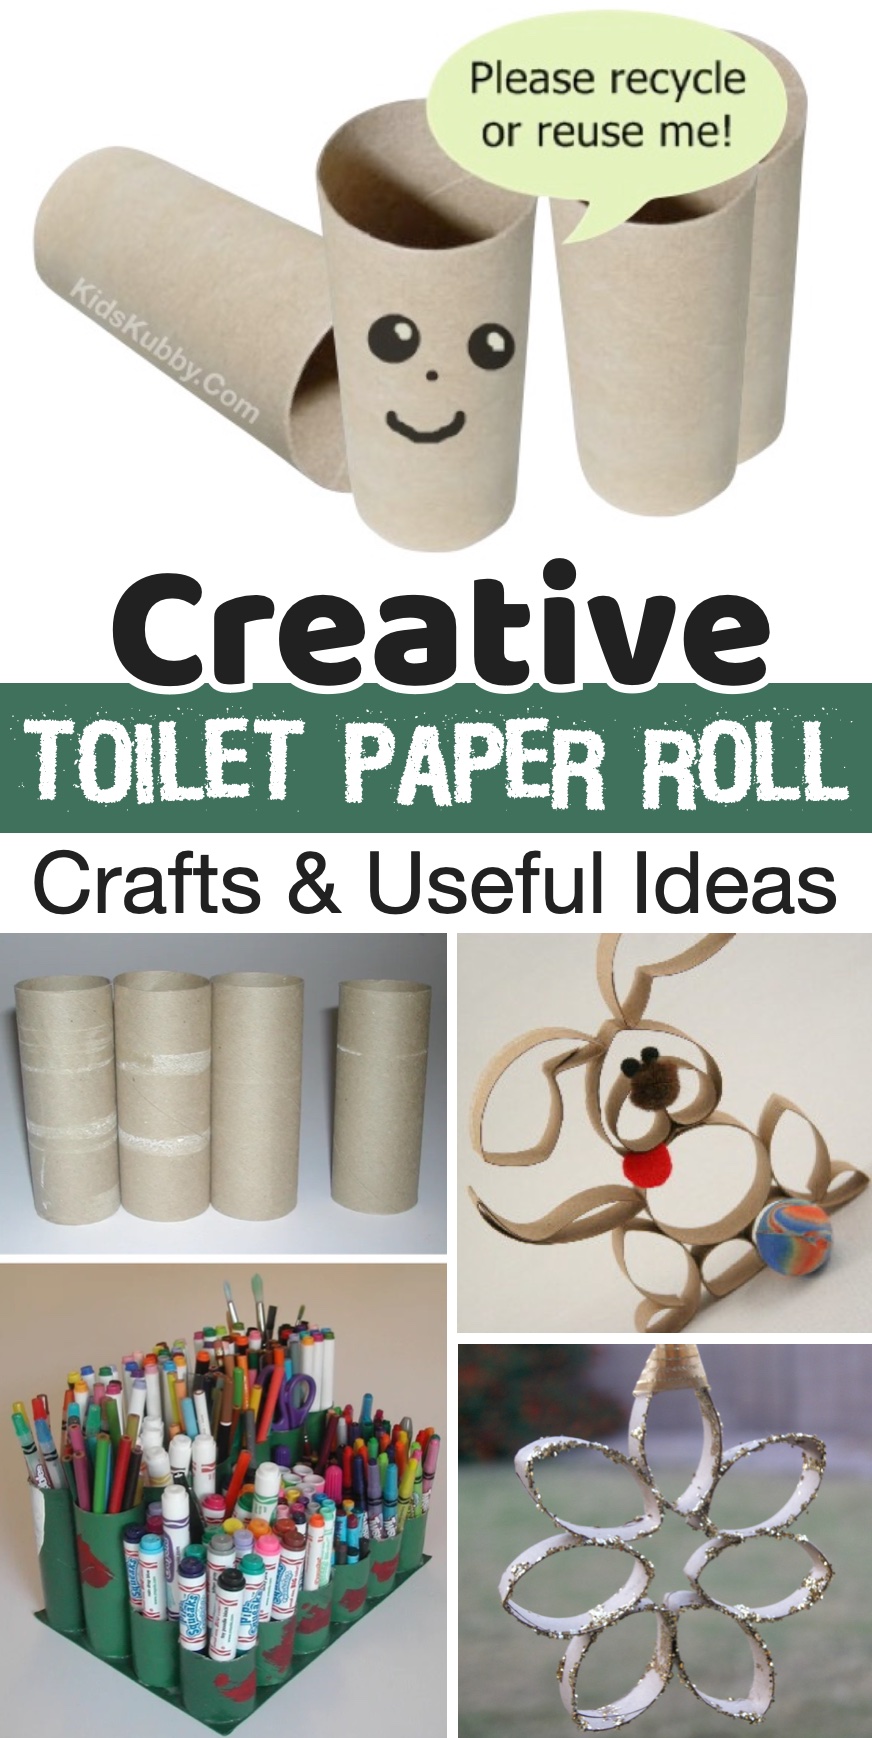 What can you make out of toilet paper rolls? Just about everything! These cheap recycled projects are so easy to make for kids of all ages, adults too! If you're looking for cheap crafts to make with supplies you probably already have at home, toilet paper rolls are the way to go. You can use paper towel rolls as well, just cut them in half. I’m excited about the ease and low cost of these cute and clever DIY toilet paper roll art projects. It's turning trash into treasure!